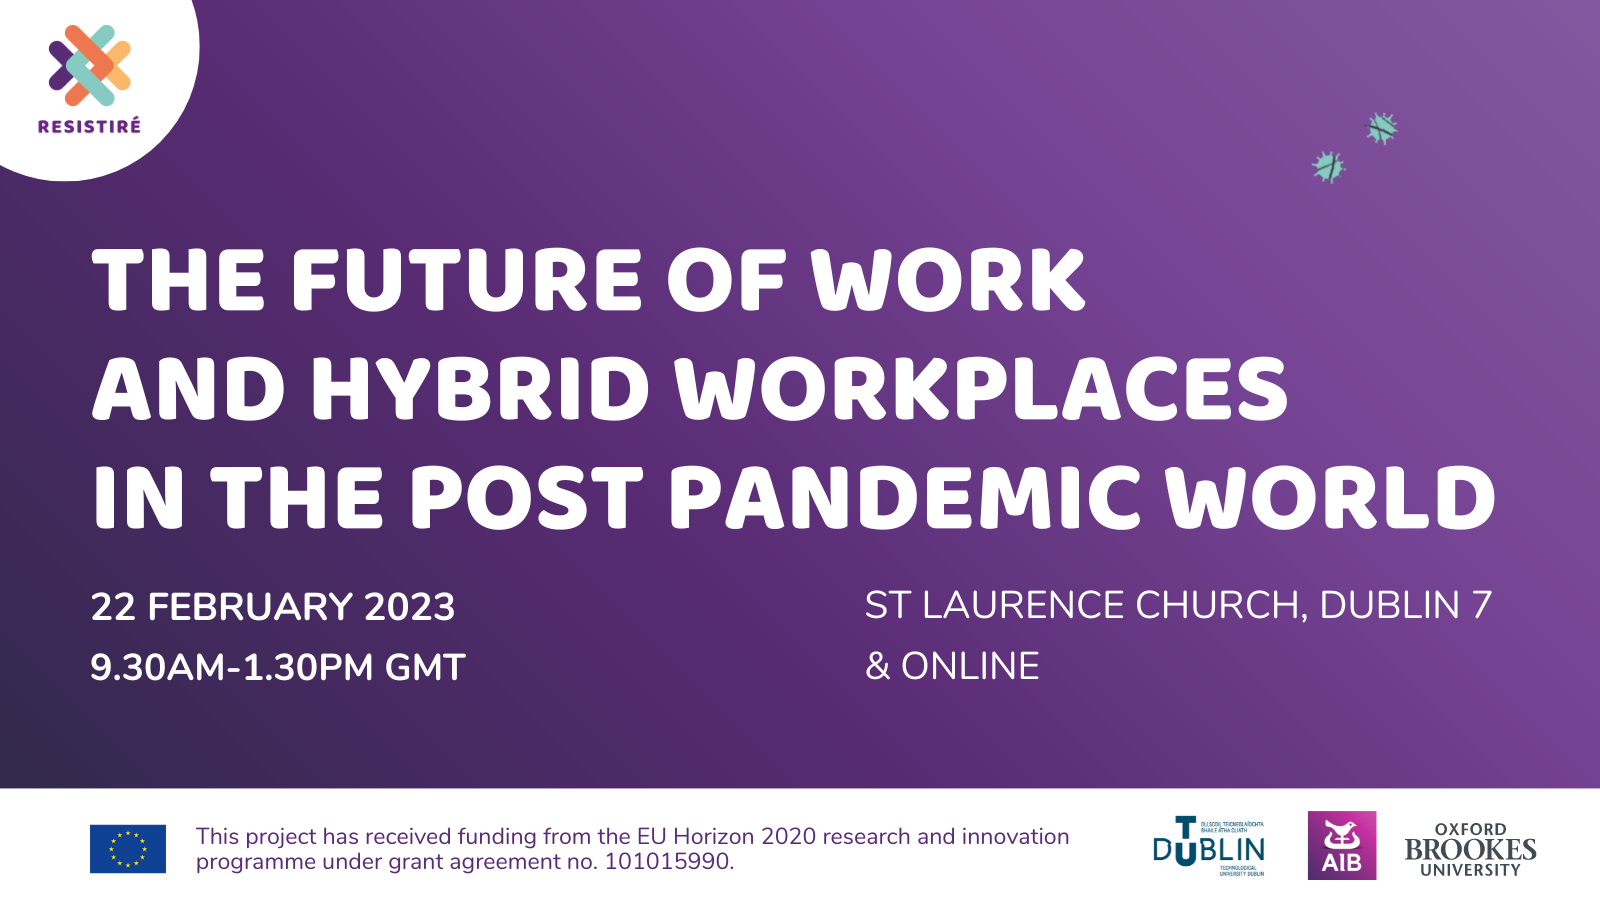 text reading the future of work and hybrid workplaces in the post pandemic world. 22 february 2023. 9:30am - 1:30pm gmt. St Laurences church dublin 7 and online. the resistiré logo appears in the top left corner. the logos of tu dublin, aid bank, and oxford brooks university appear in the bottom right corner.